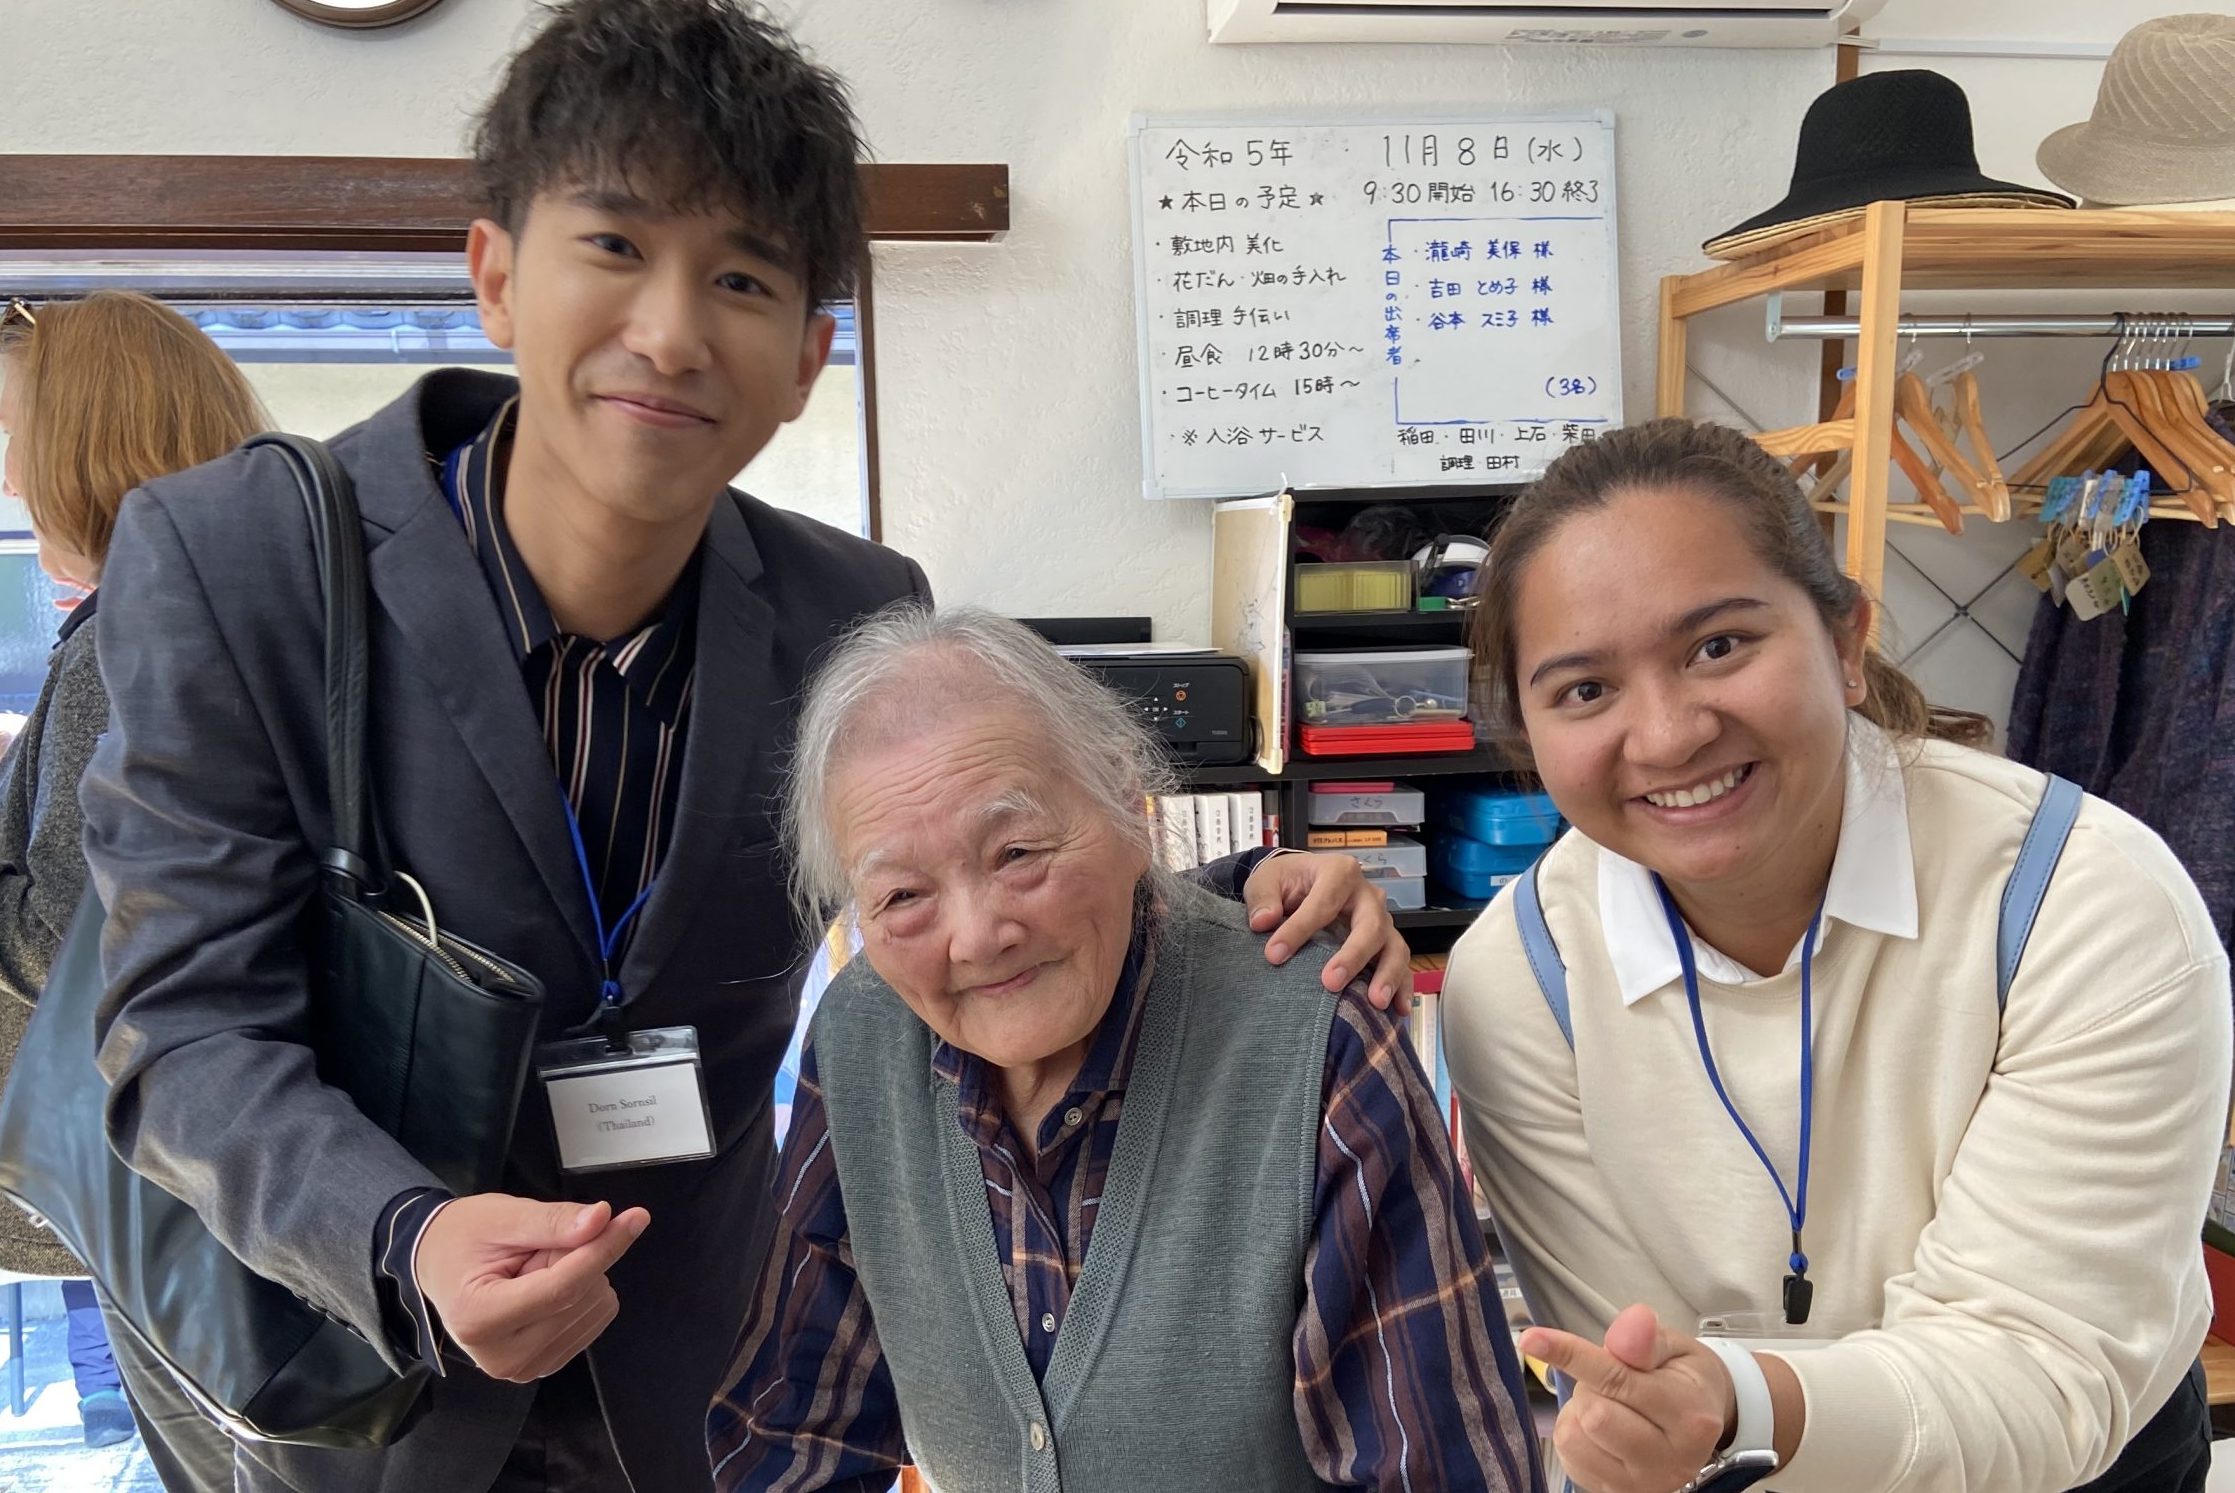 Participants from Thailand during a visit to Imaizumi care center for older people